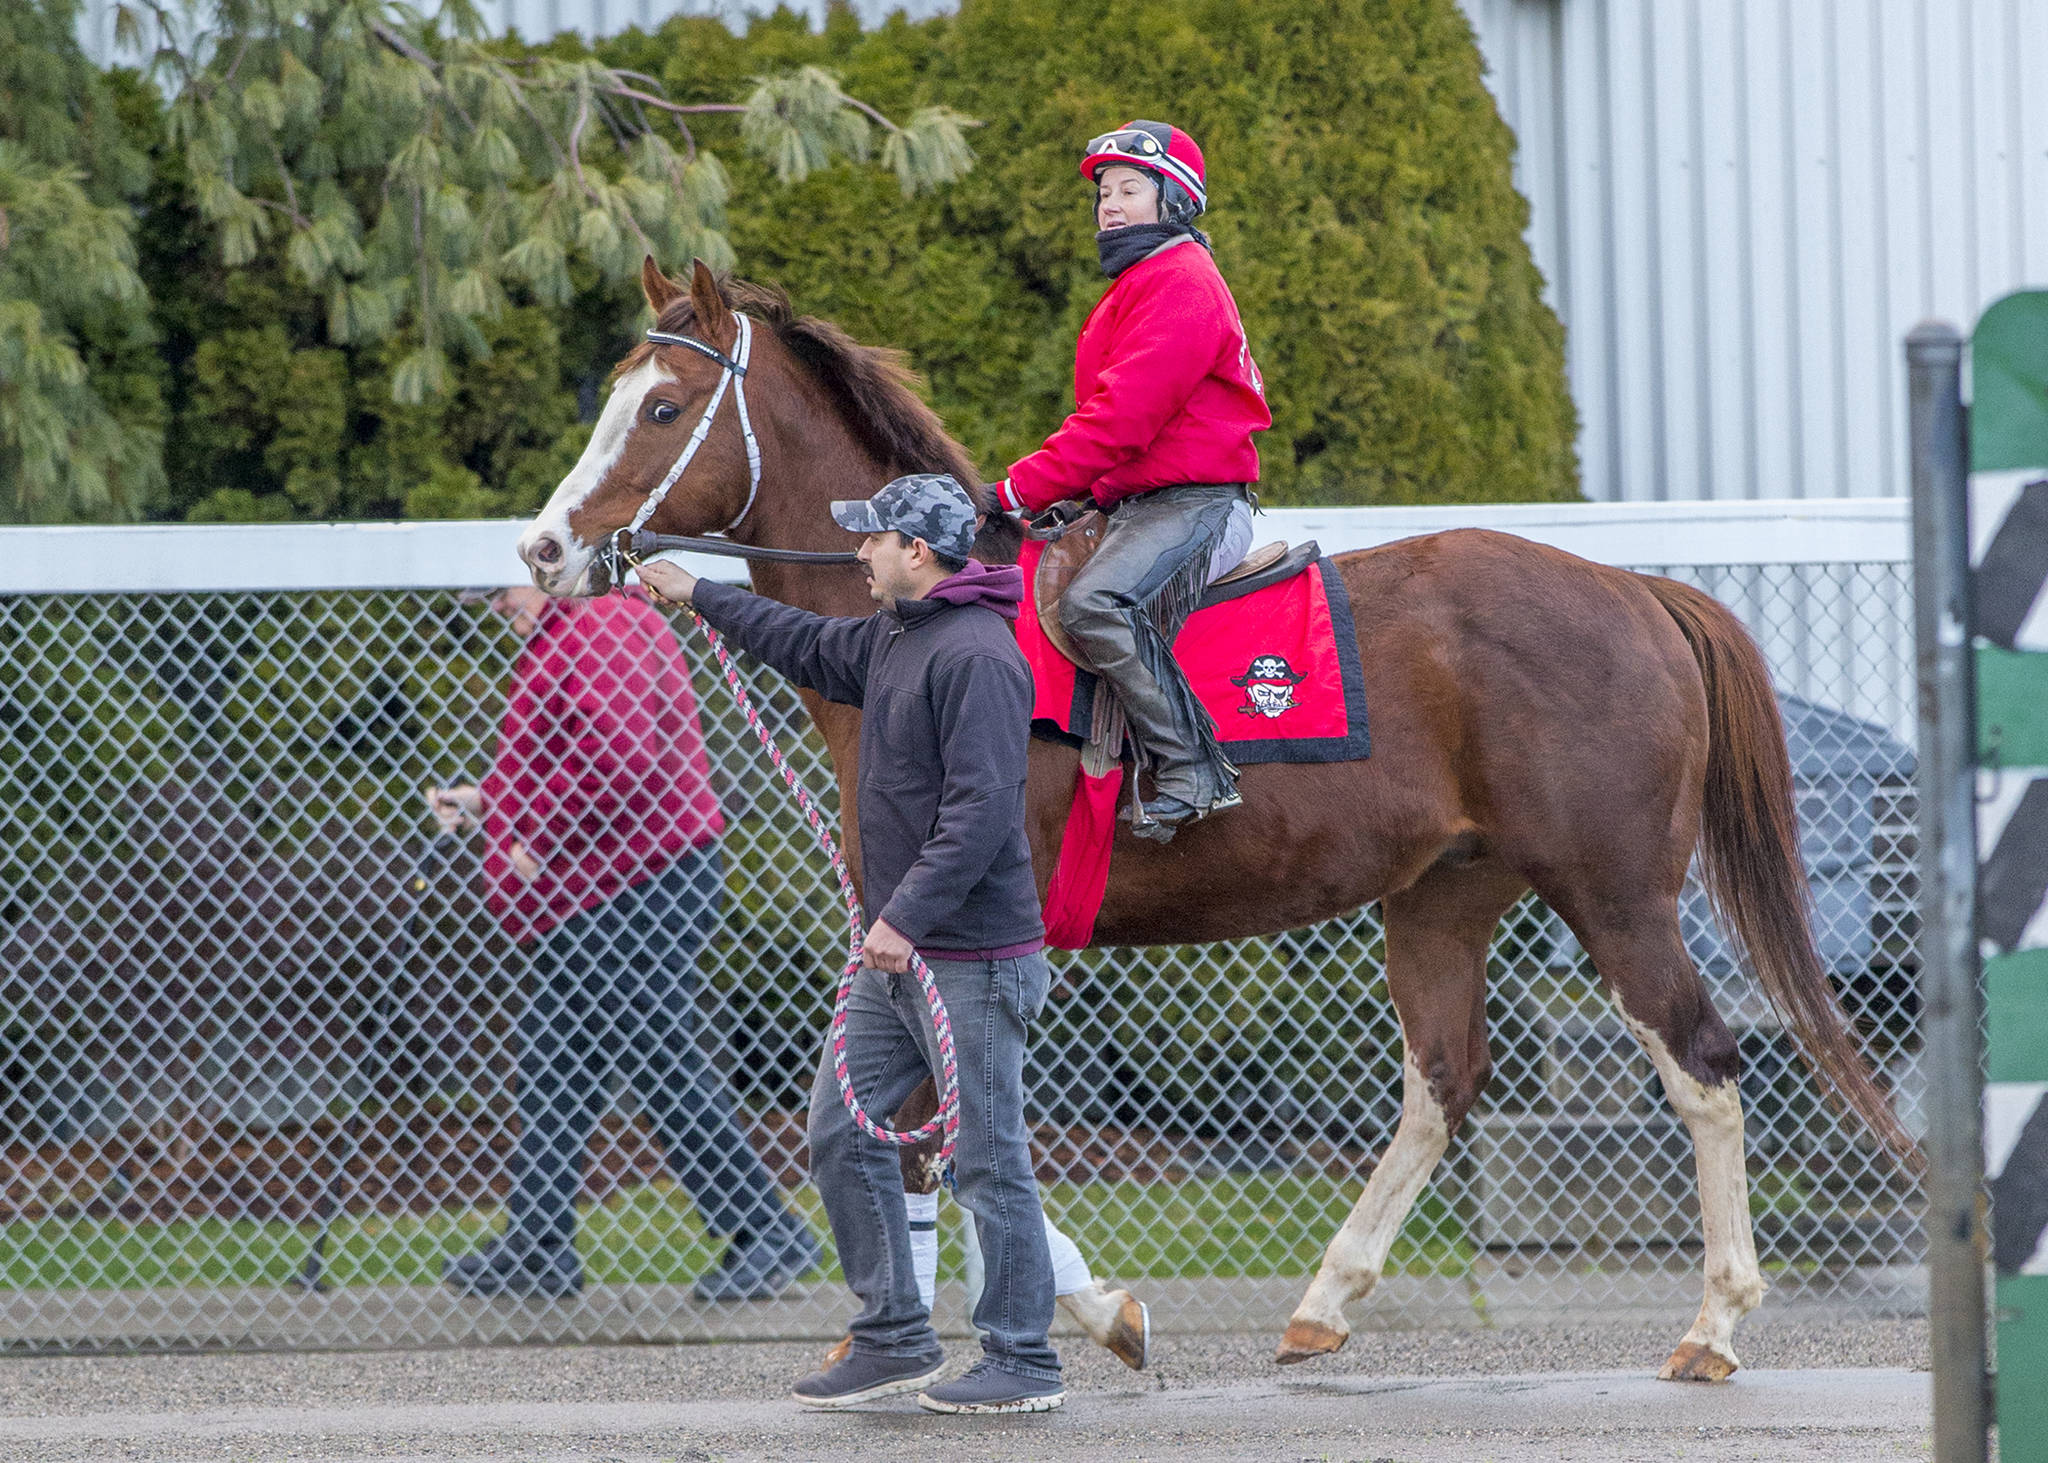 Barkley, the 2018 Longacres Mile champion, and Jennifer Whitaker were first on the track for winter training at Emerald Downs on Monday. COURTESY PHOTO